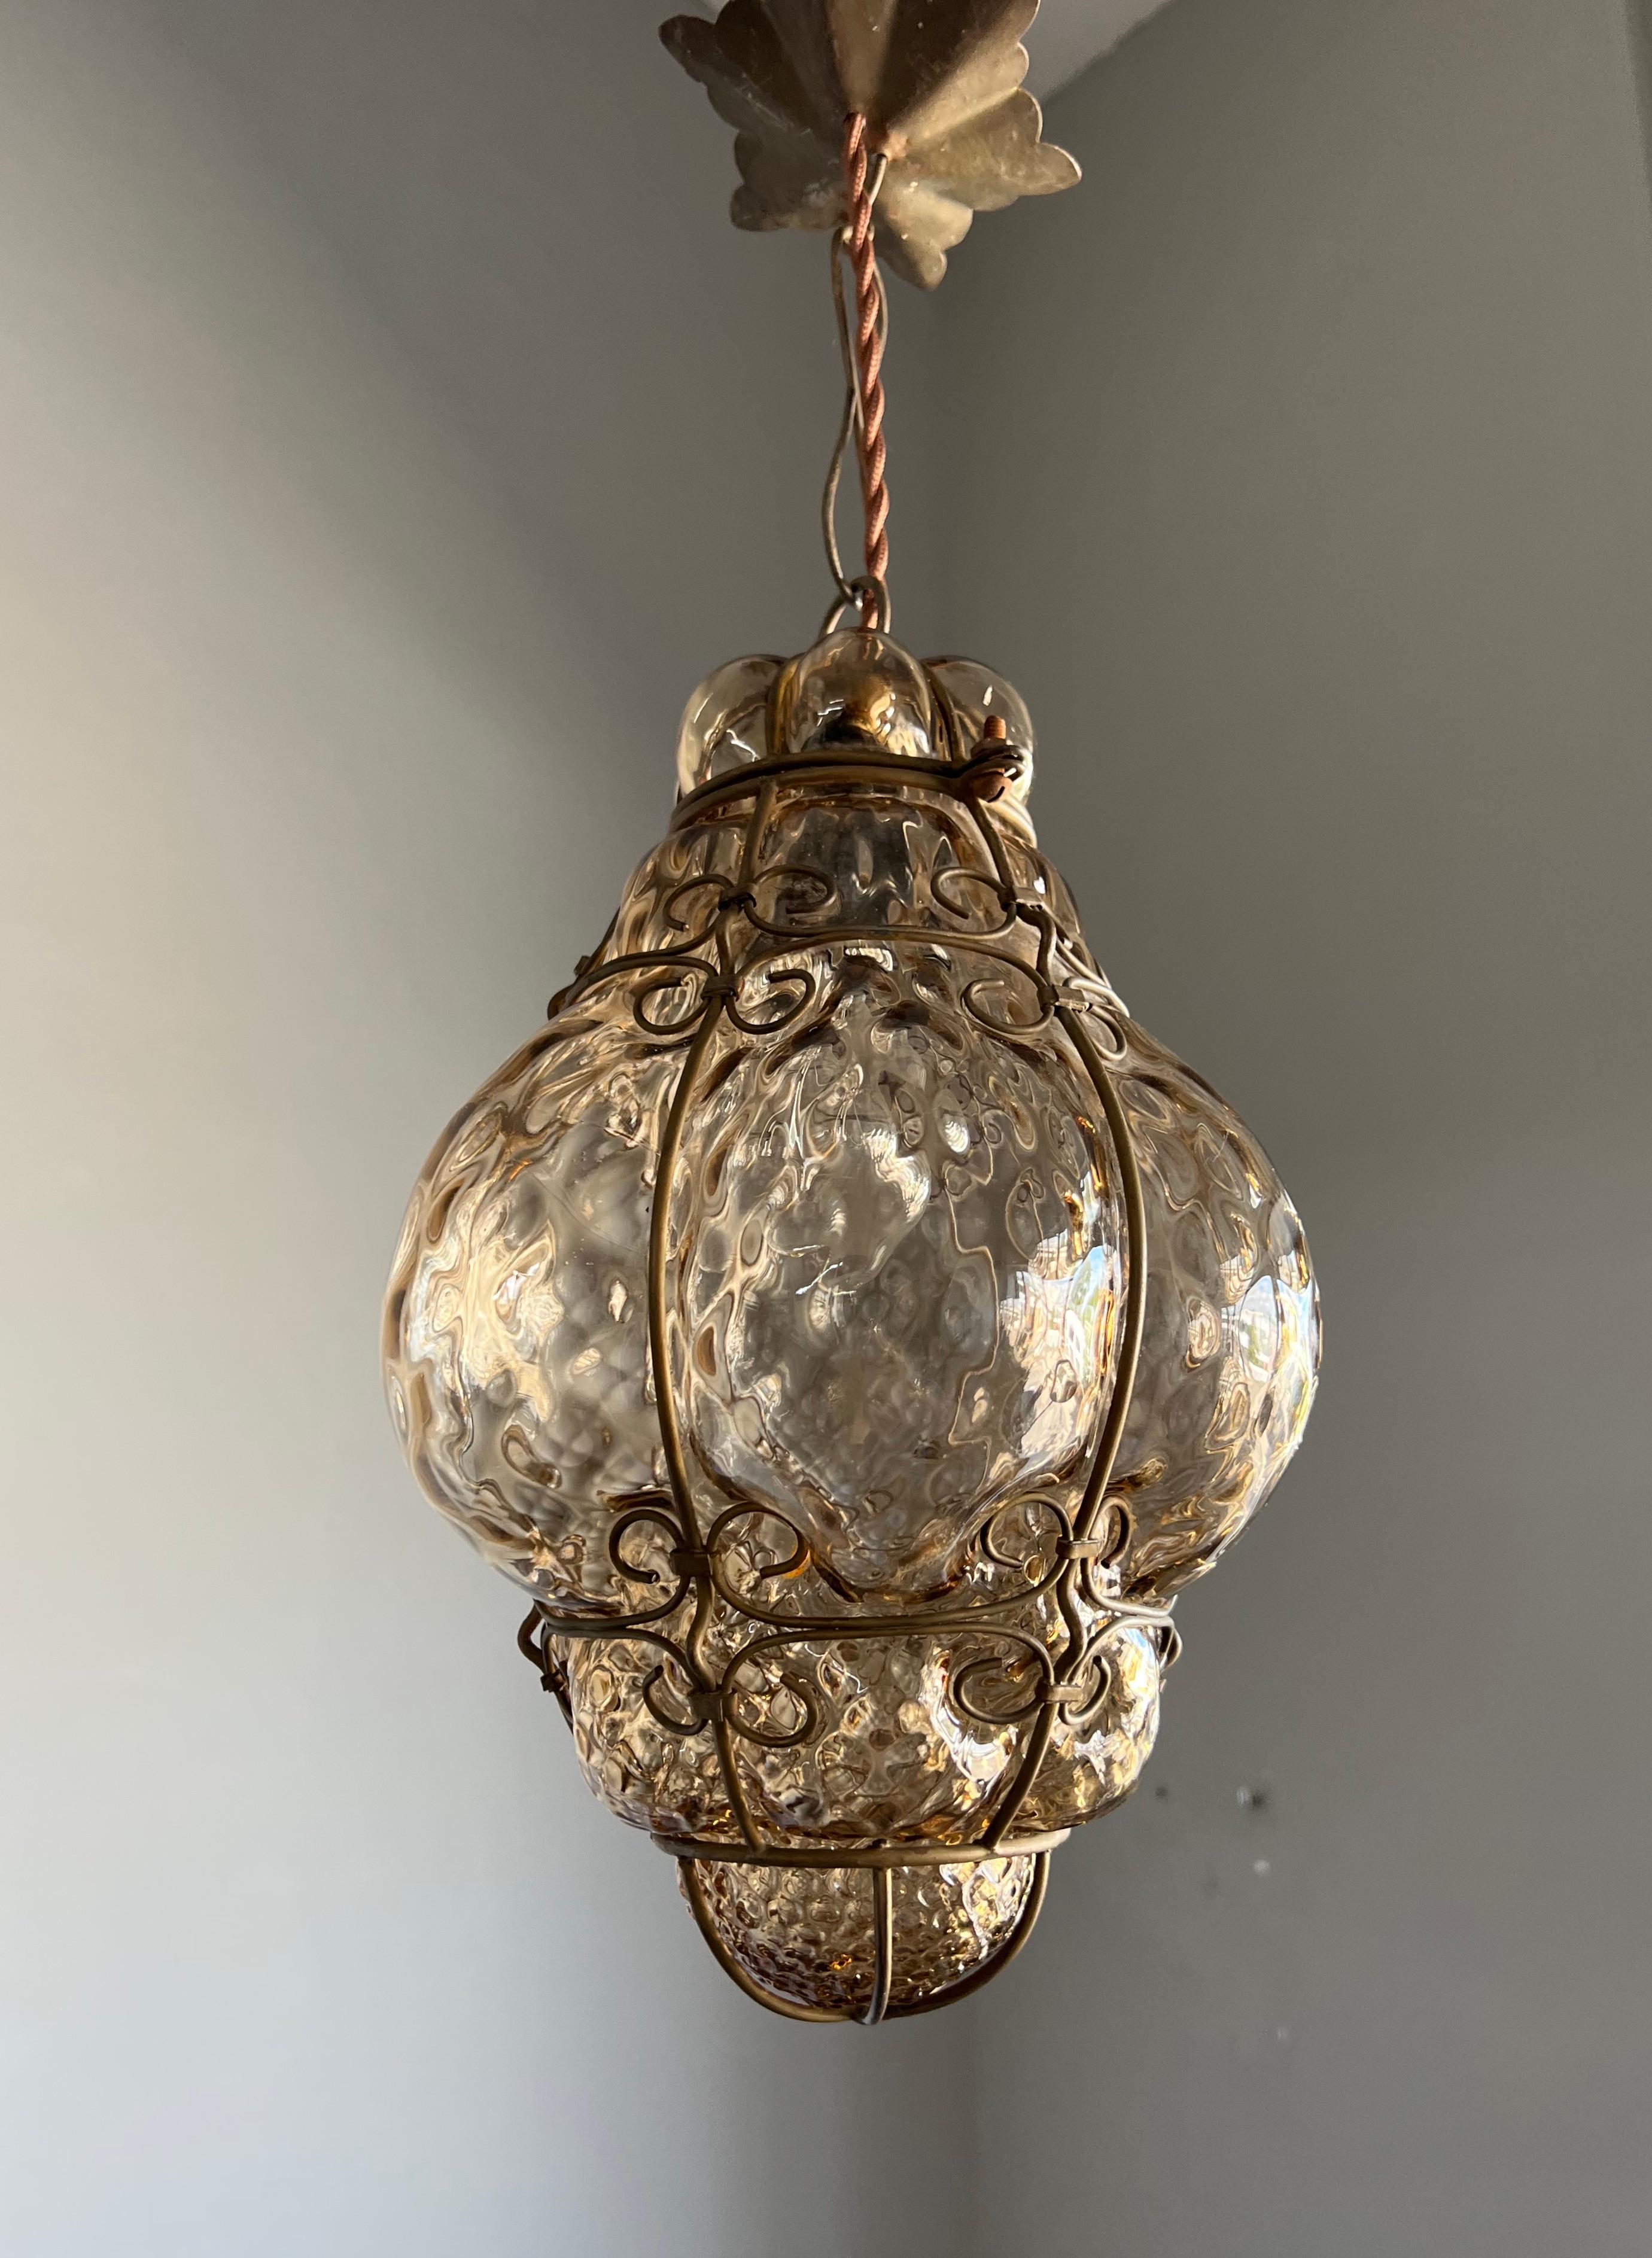 20th Century Small Antique Venetian Mouth Blown Smoked Glass Art in Iron Frame Pendant Light For Sale